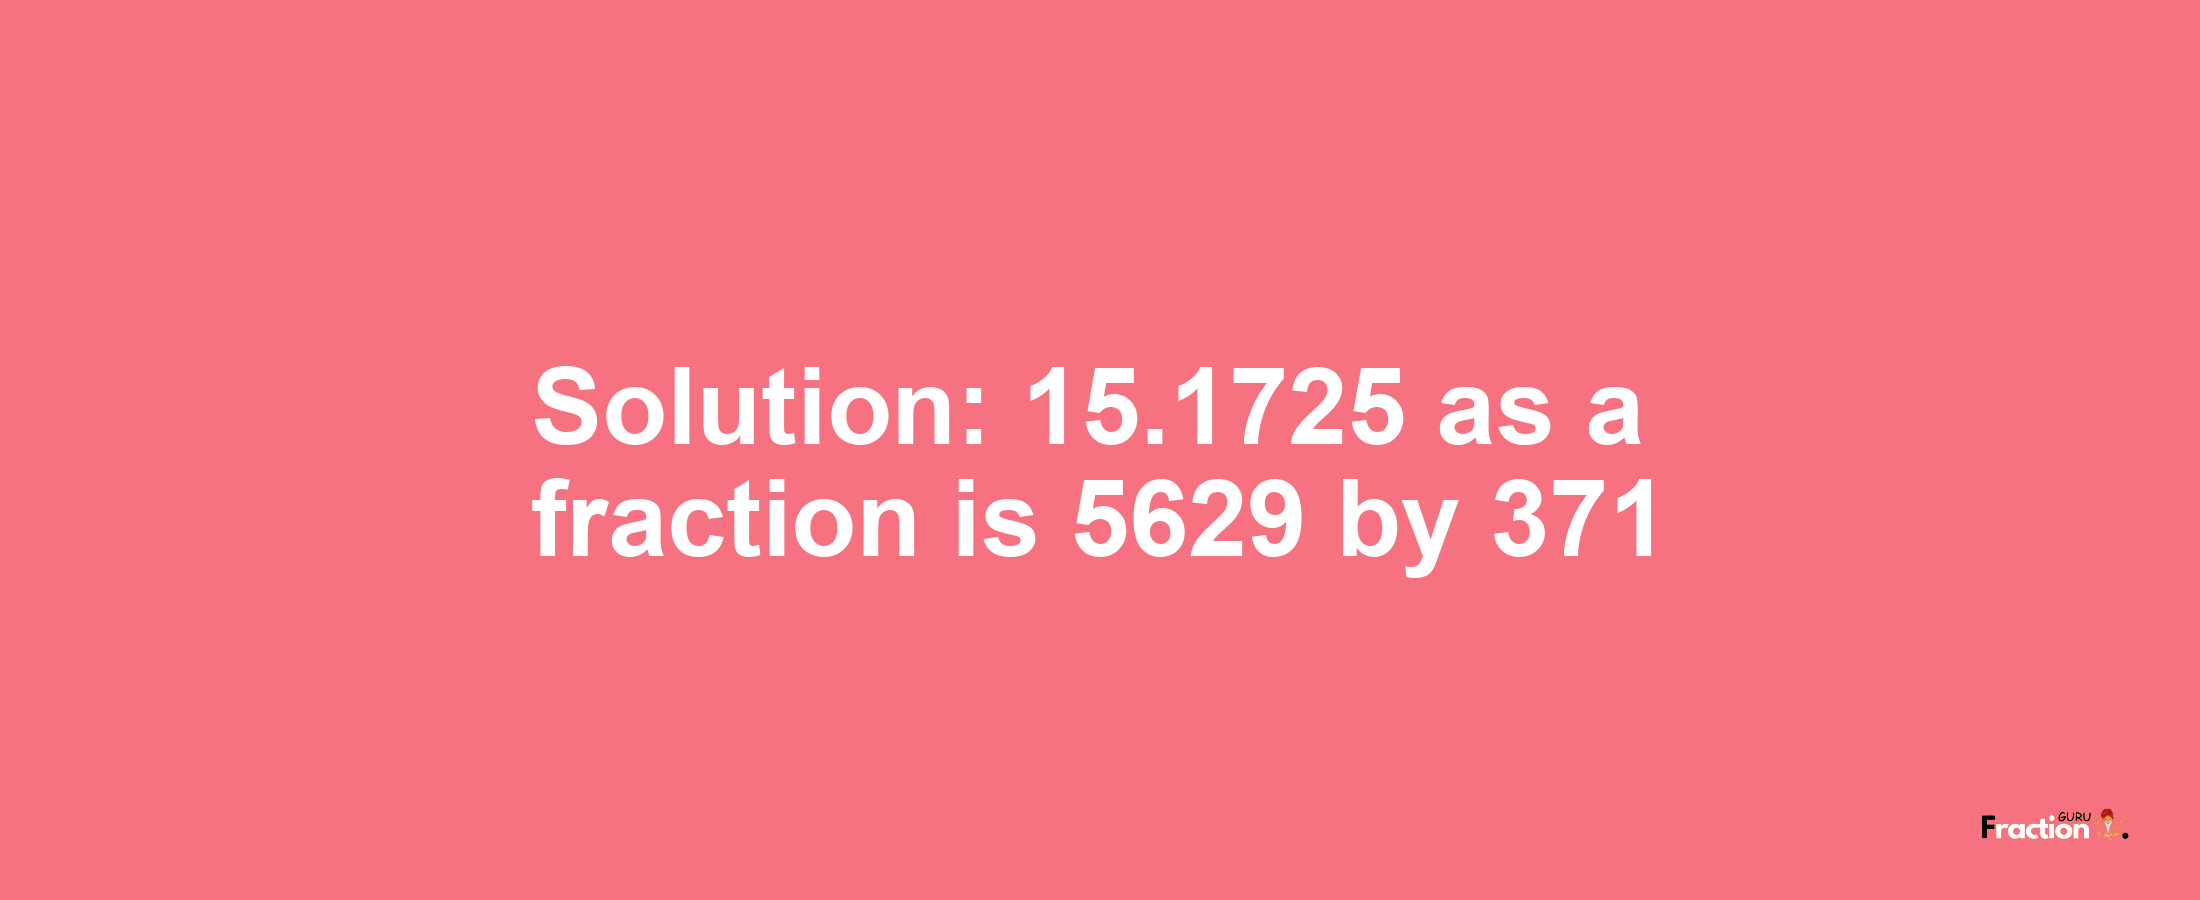 Solution:15.1725 as a fraction is 5629/371